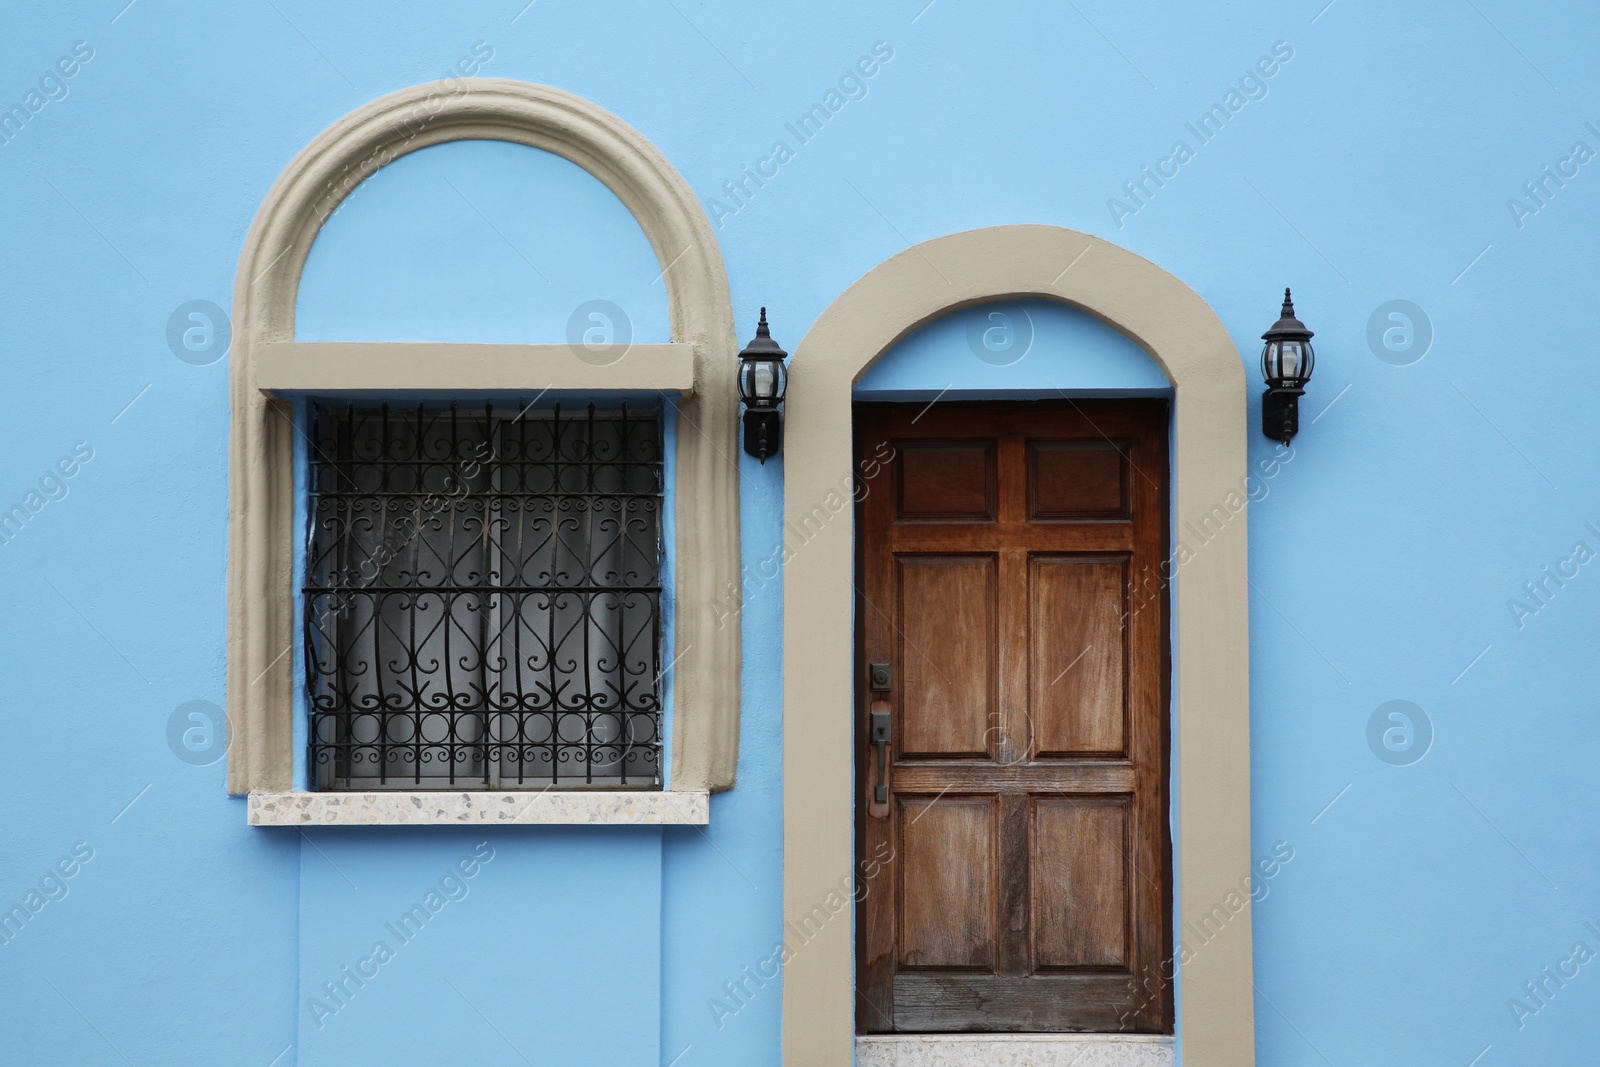 Photo of Entrance of residential house with wooden door and window